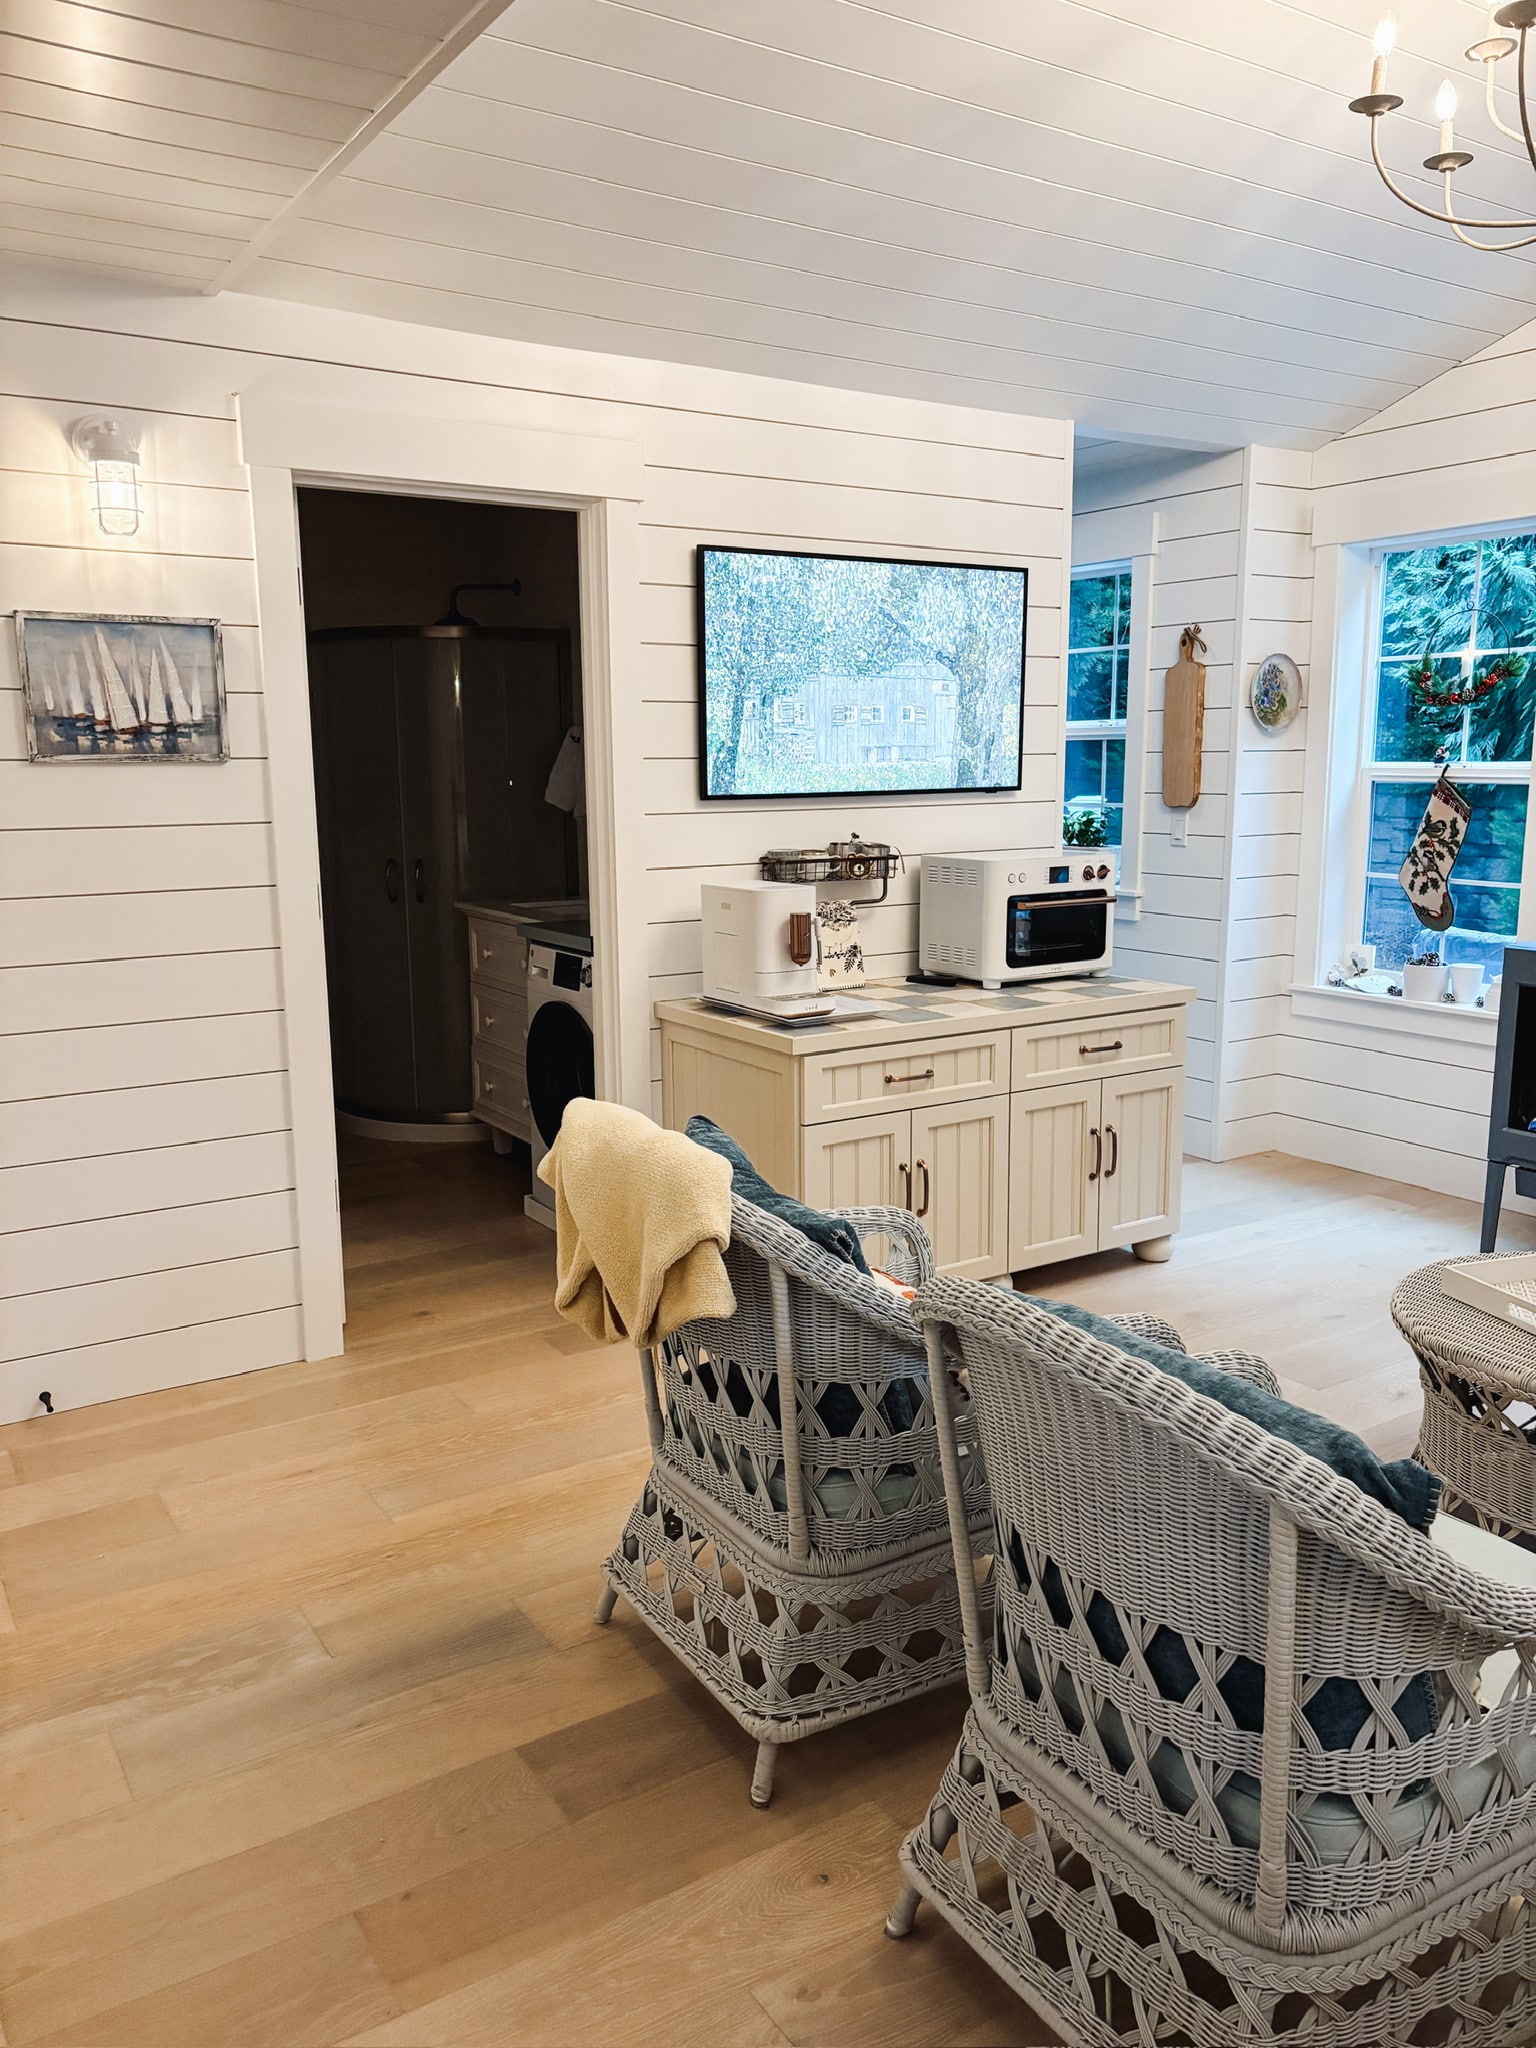 The 400 Square Foot Tiny Cottage Tour at Christmas!